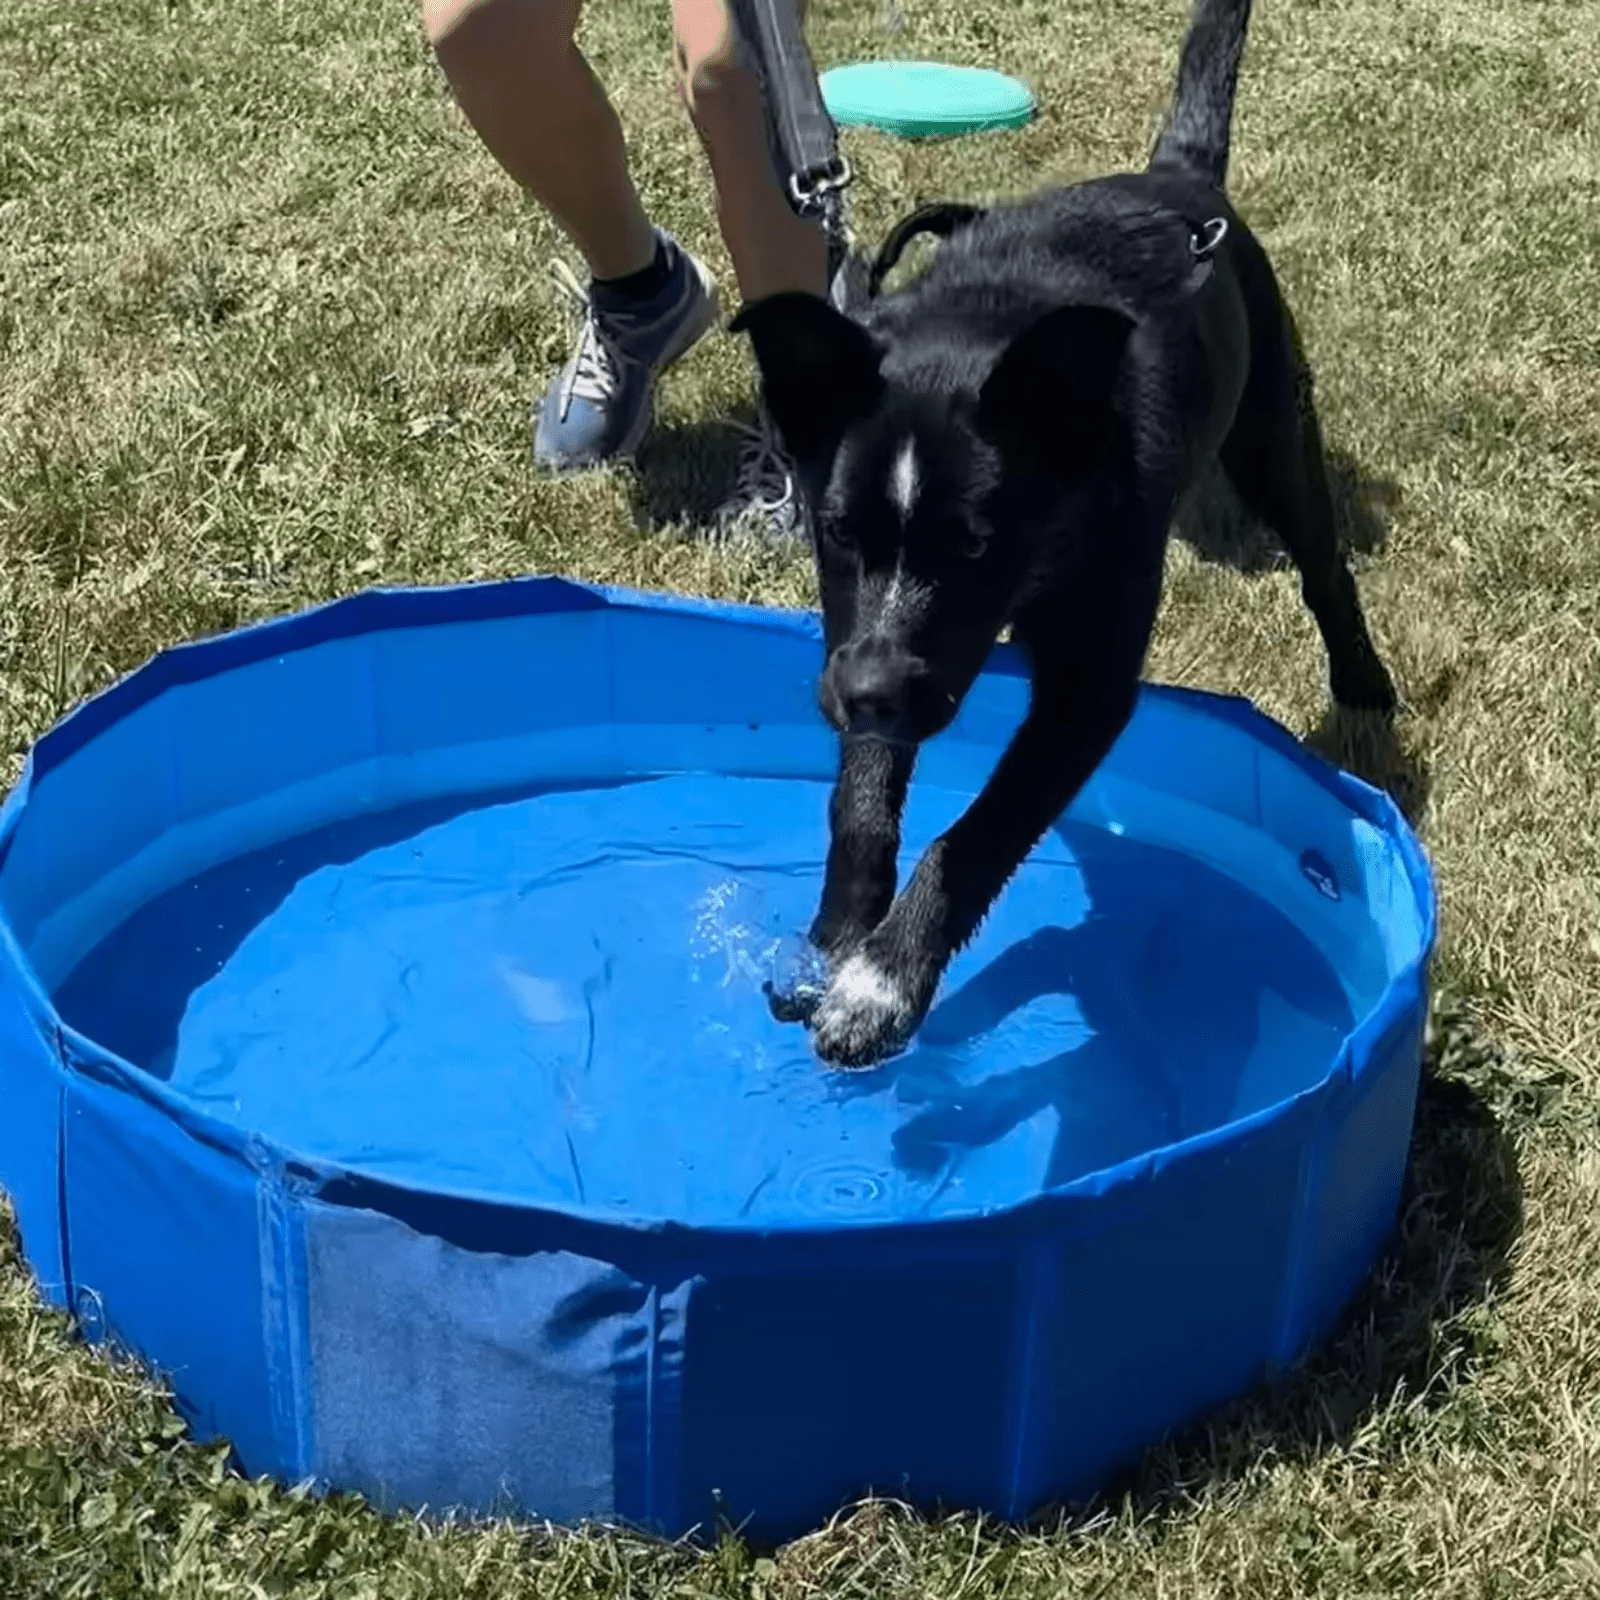 A dog named Bob about to jump into a small pet pool